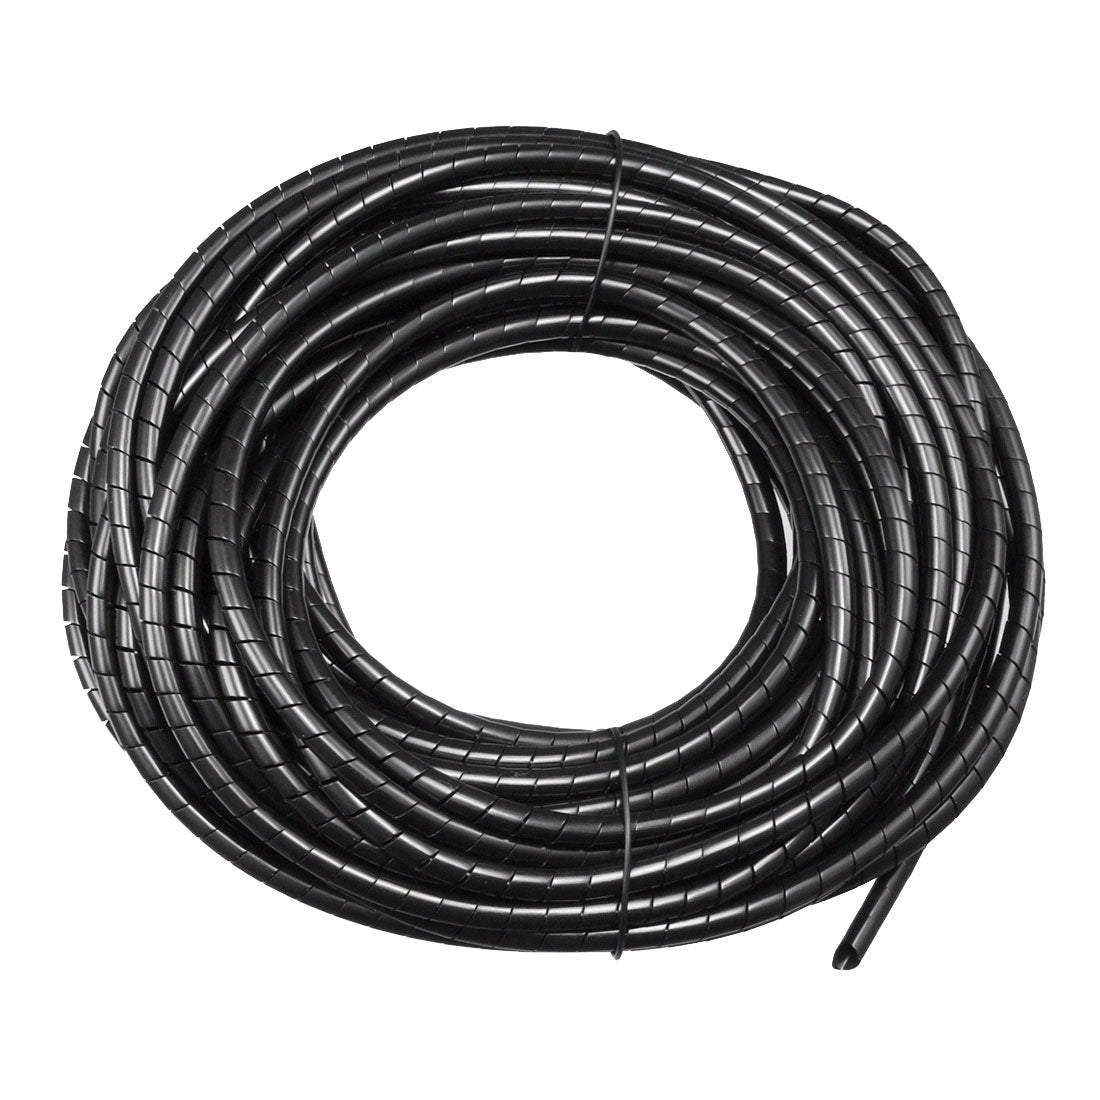 uxcell Uxcell 6mm Flexible Spiral Tube Cable Wire Wrap Computer Manage Cord Black 14-15M